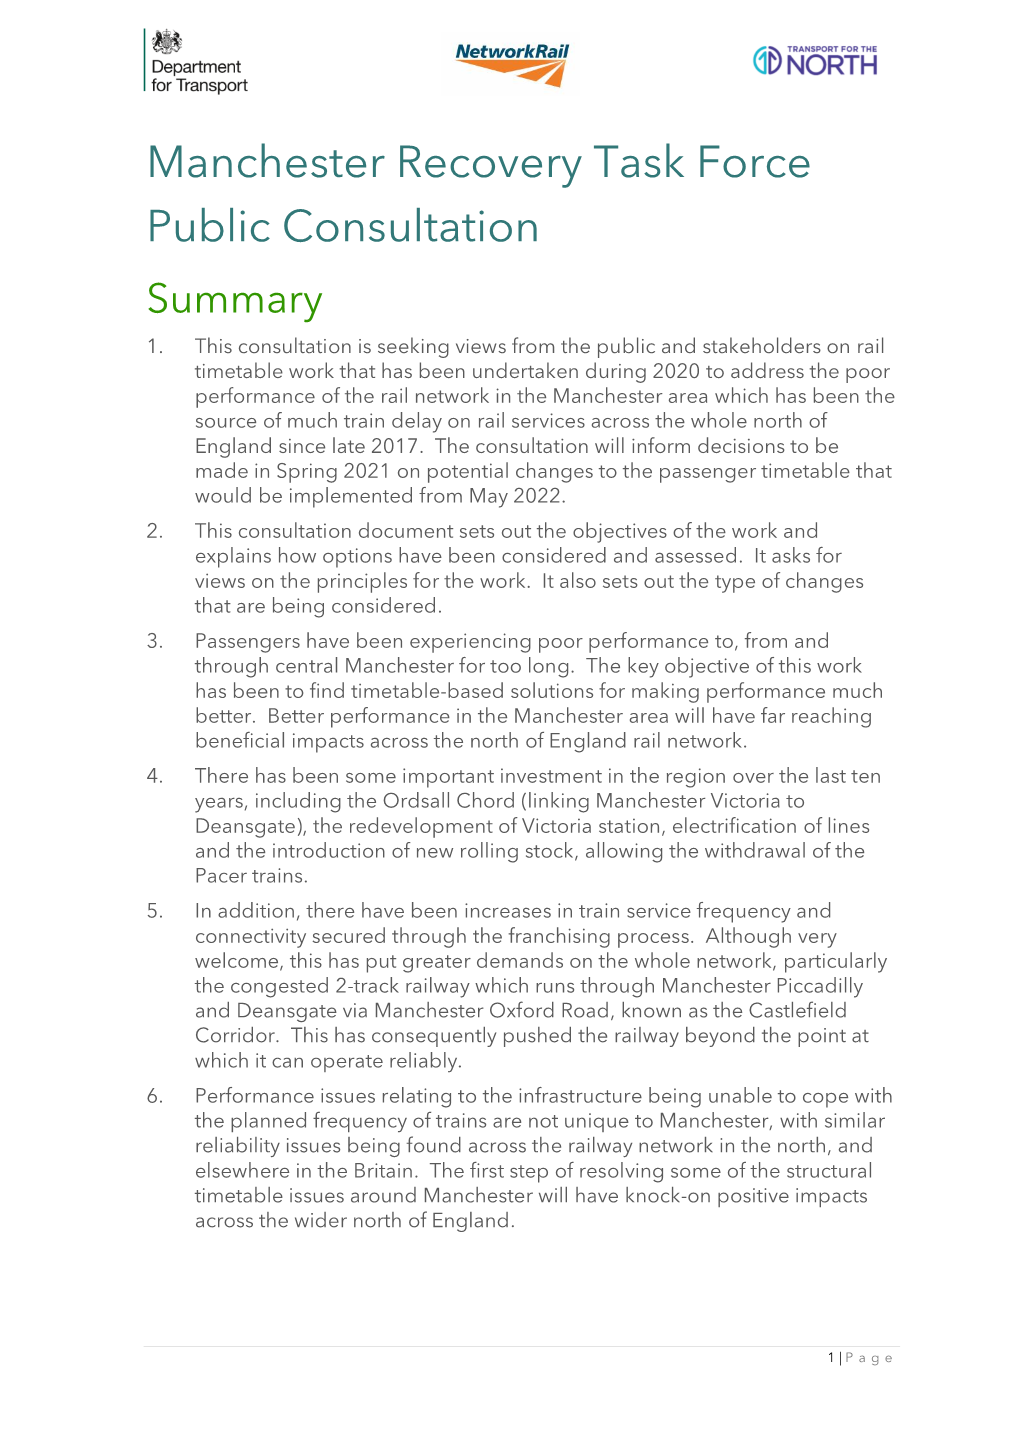 Manchester Recovery Task Force: Public Consultation